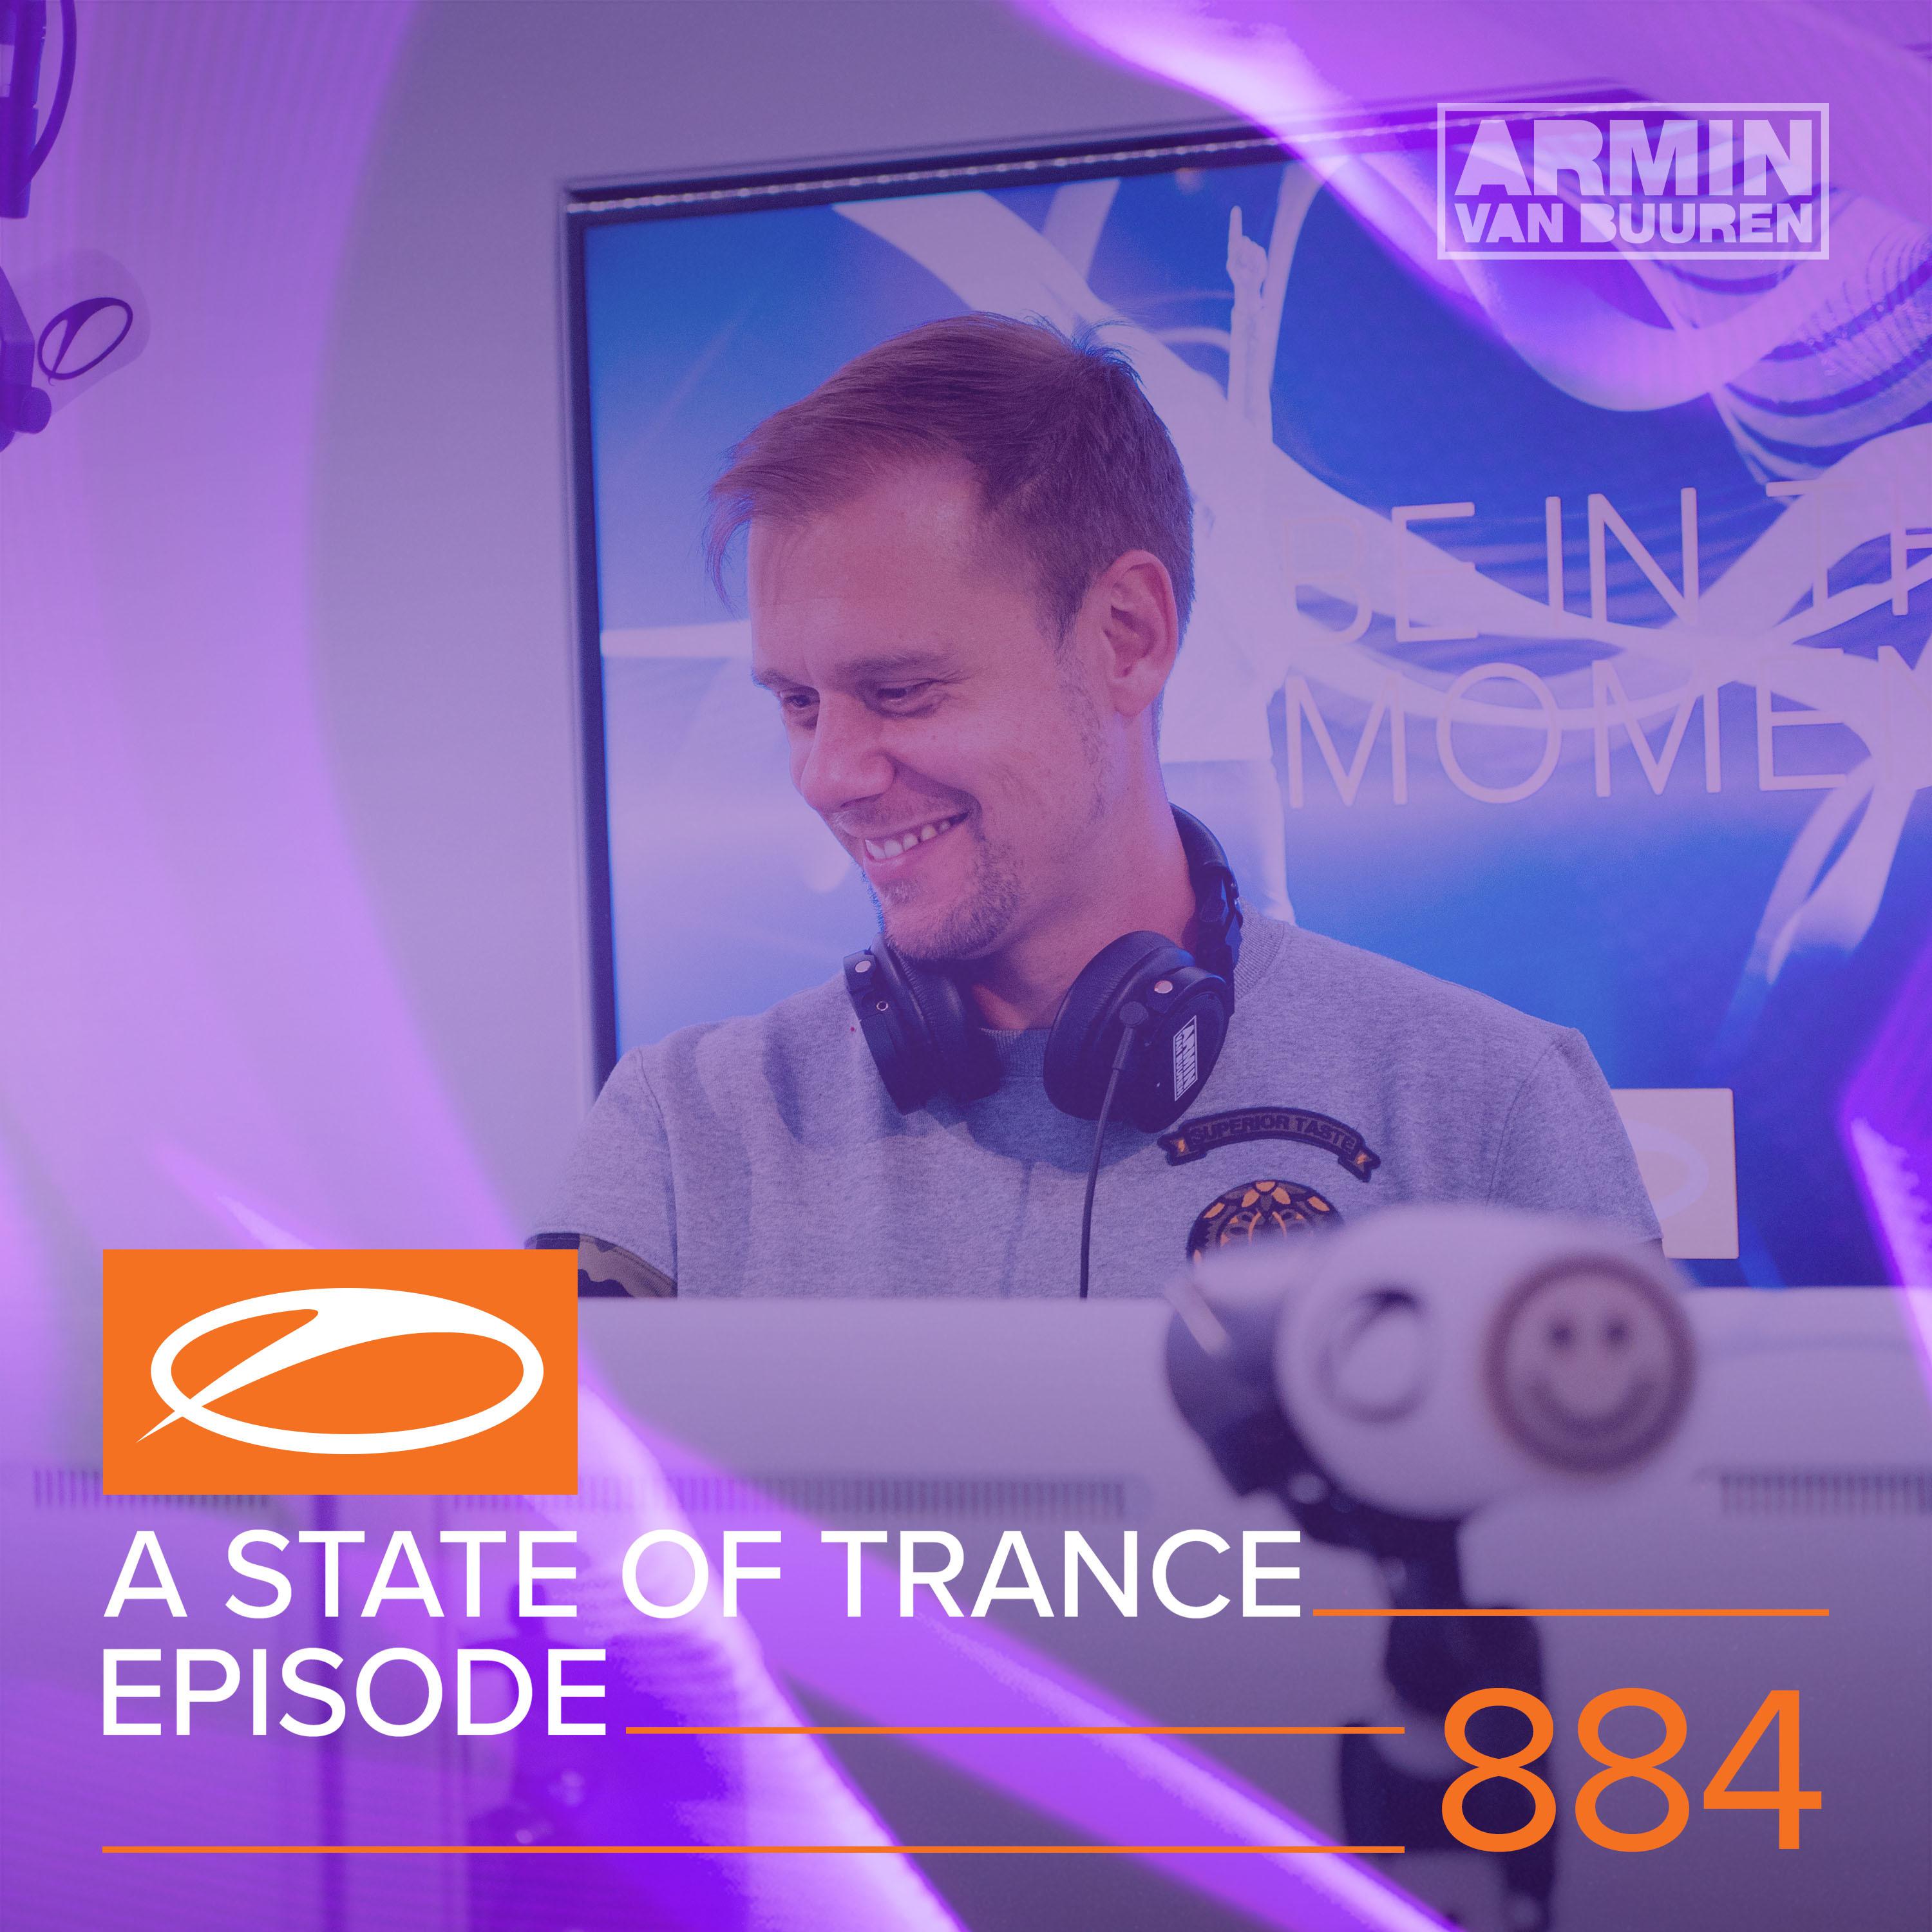 A State Of Trance (ASOT 884) (This Week's Service For Dreamers, Pt. 1)